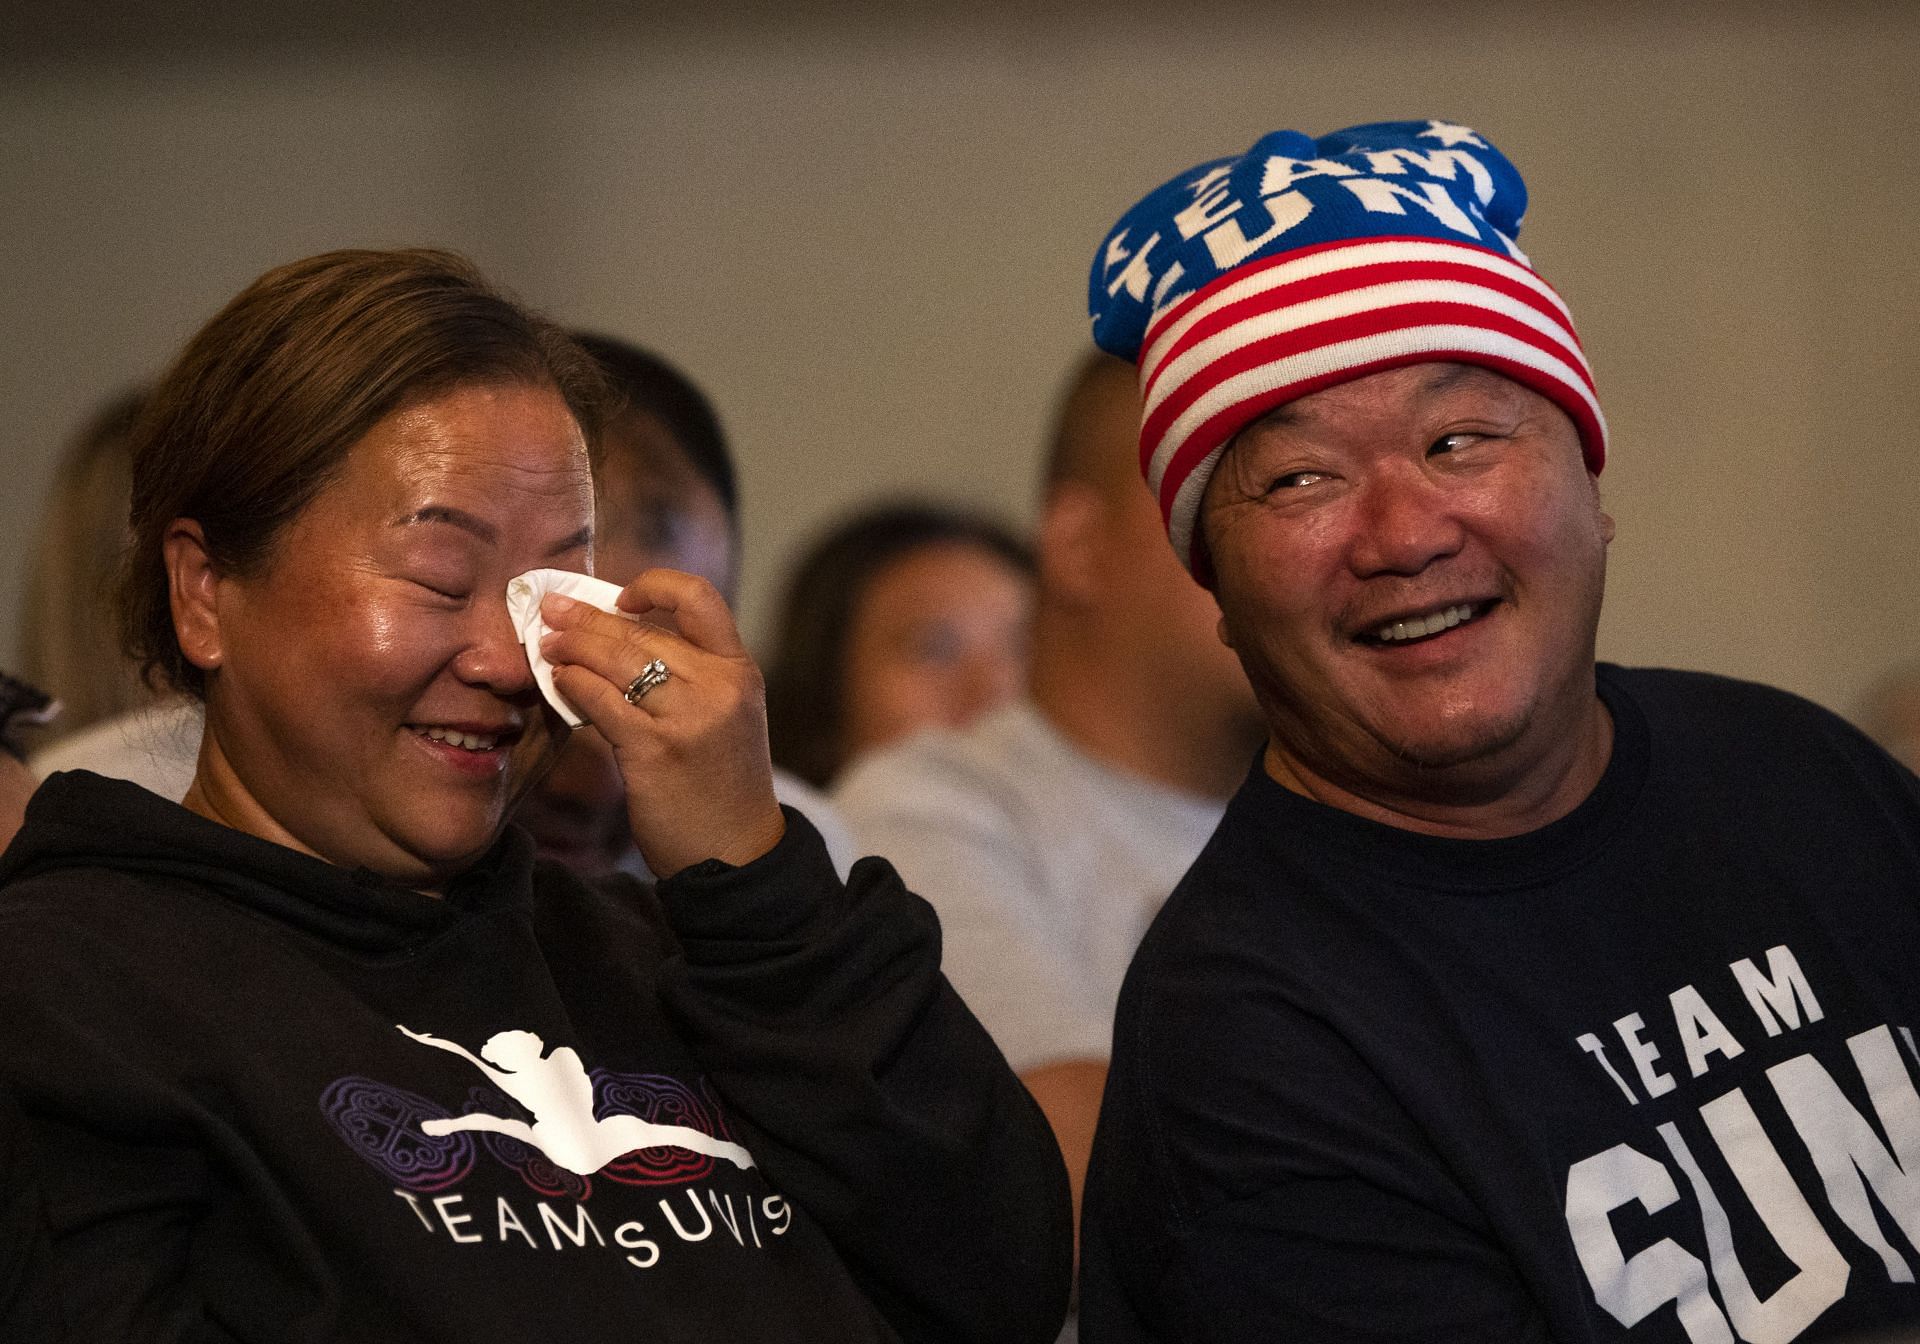 Yeev Thoj (left) and John Lee at the United States Olympic Gymnastics Viewing Event with members of the Hmong community (Image via Stephen Maturen/Getty Images)